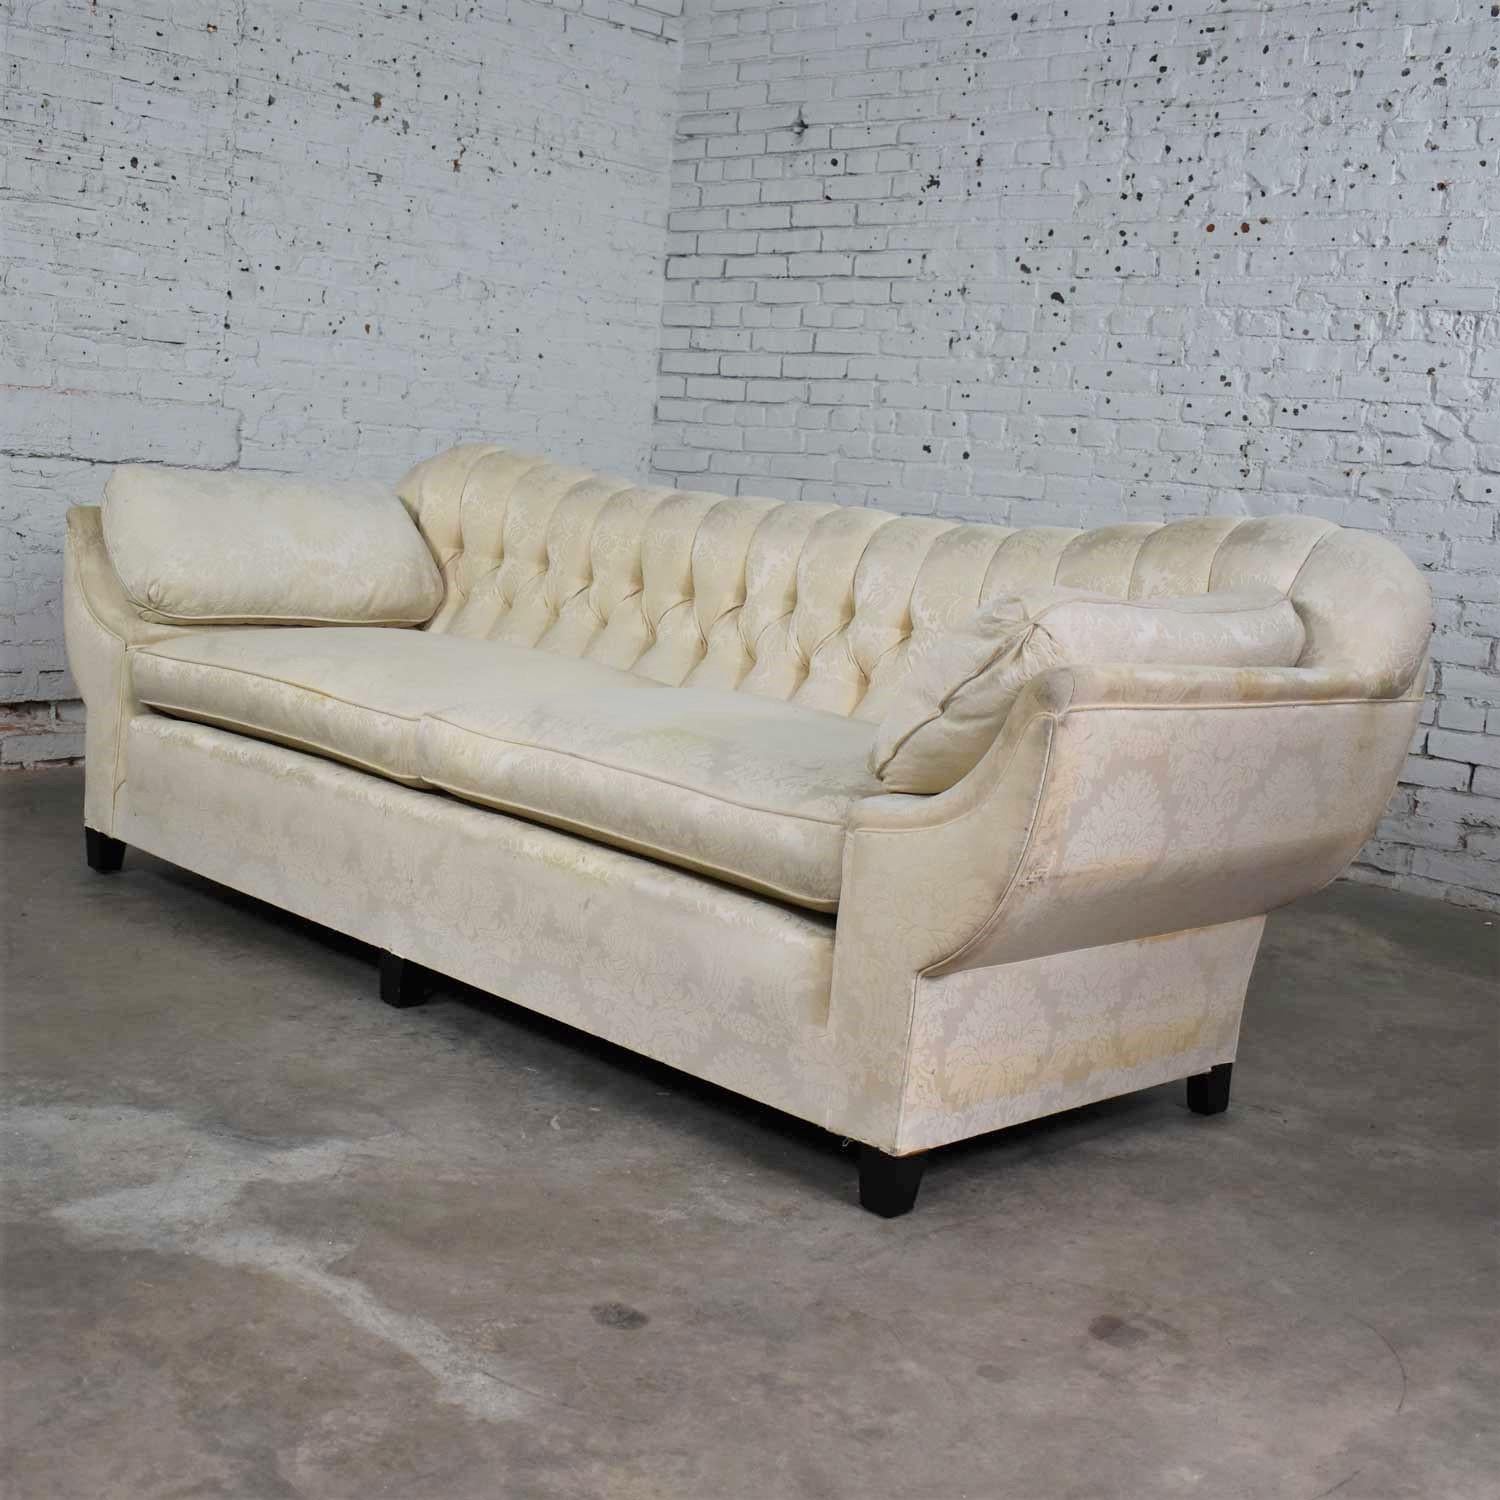 Vintage Art Deco Hollywood Regency Sofa Tufted Back and Concave Pillowed Arms For Sale 7